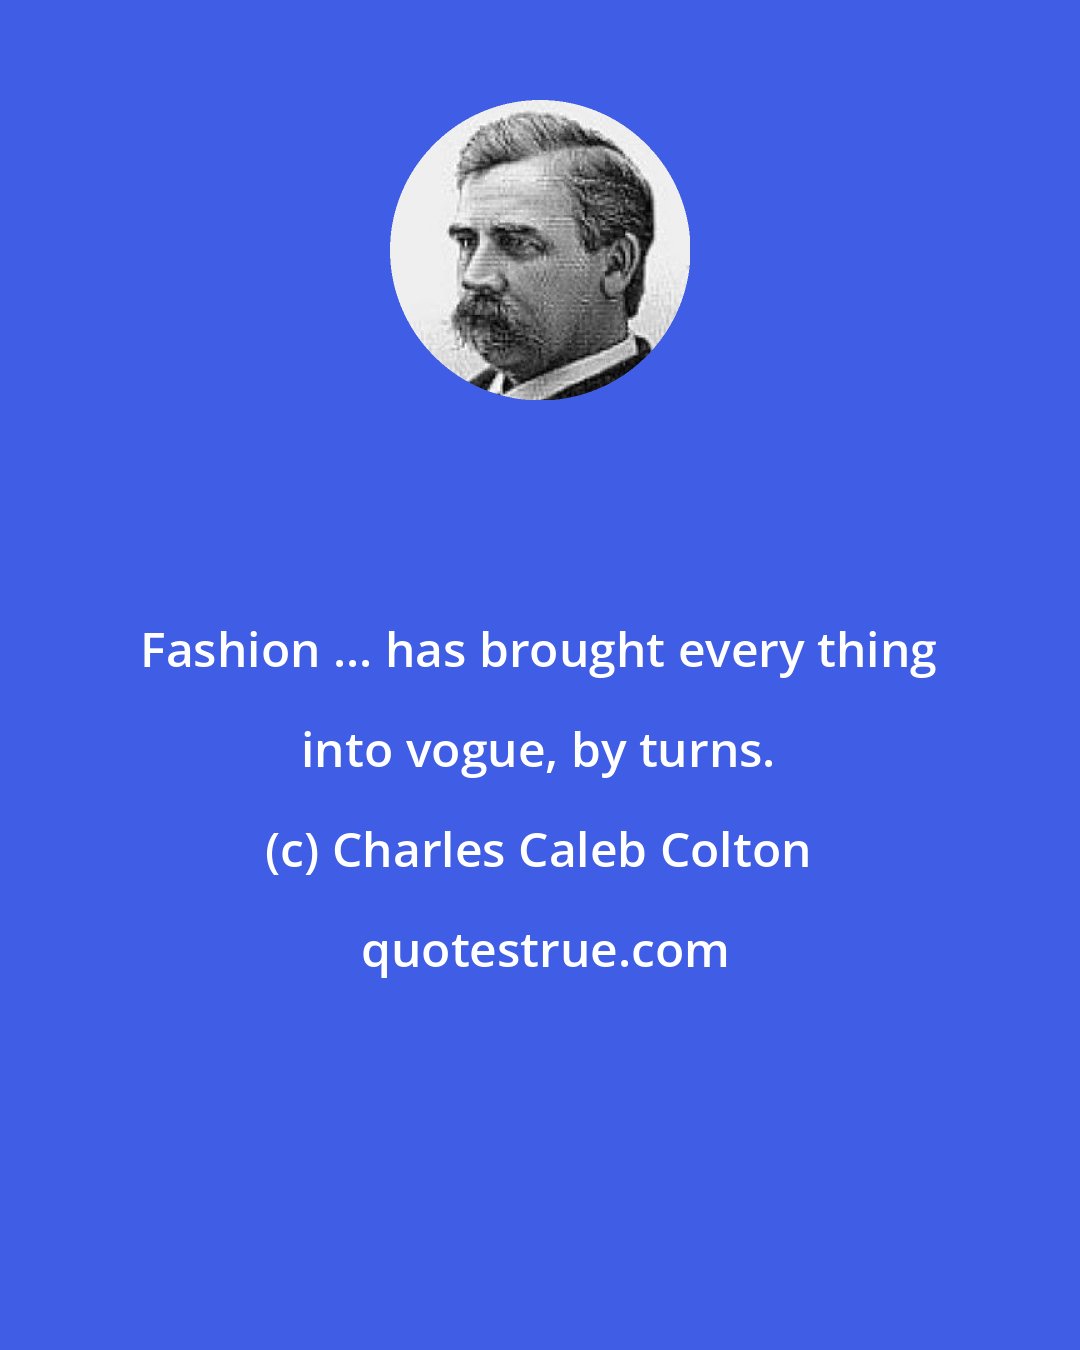 Charles Caleb Colton: Fashion ... has brought every thing into vogue, by turns.